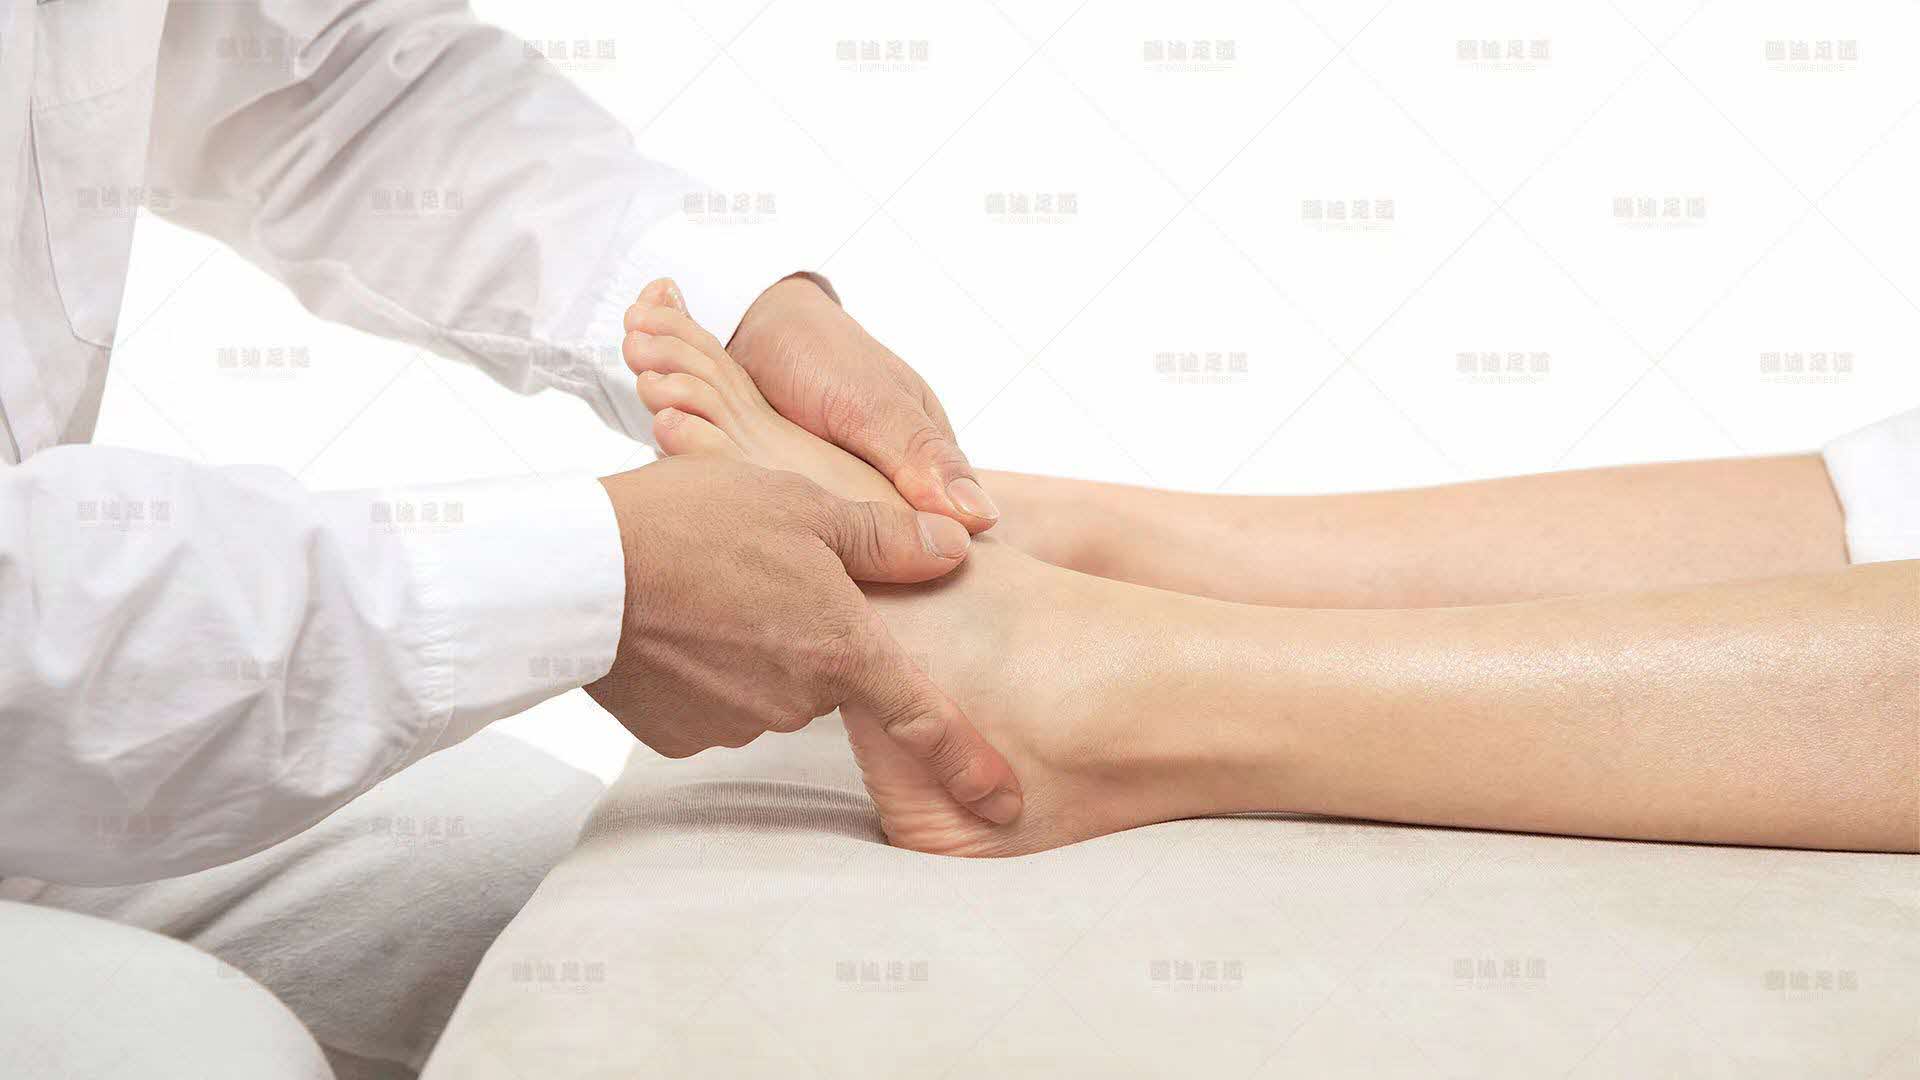 [Klook Exclusive] Body Massage and Foot Reflexology at OD Wellness